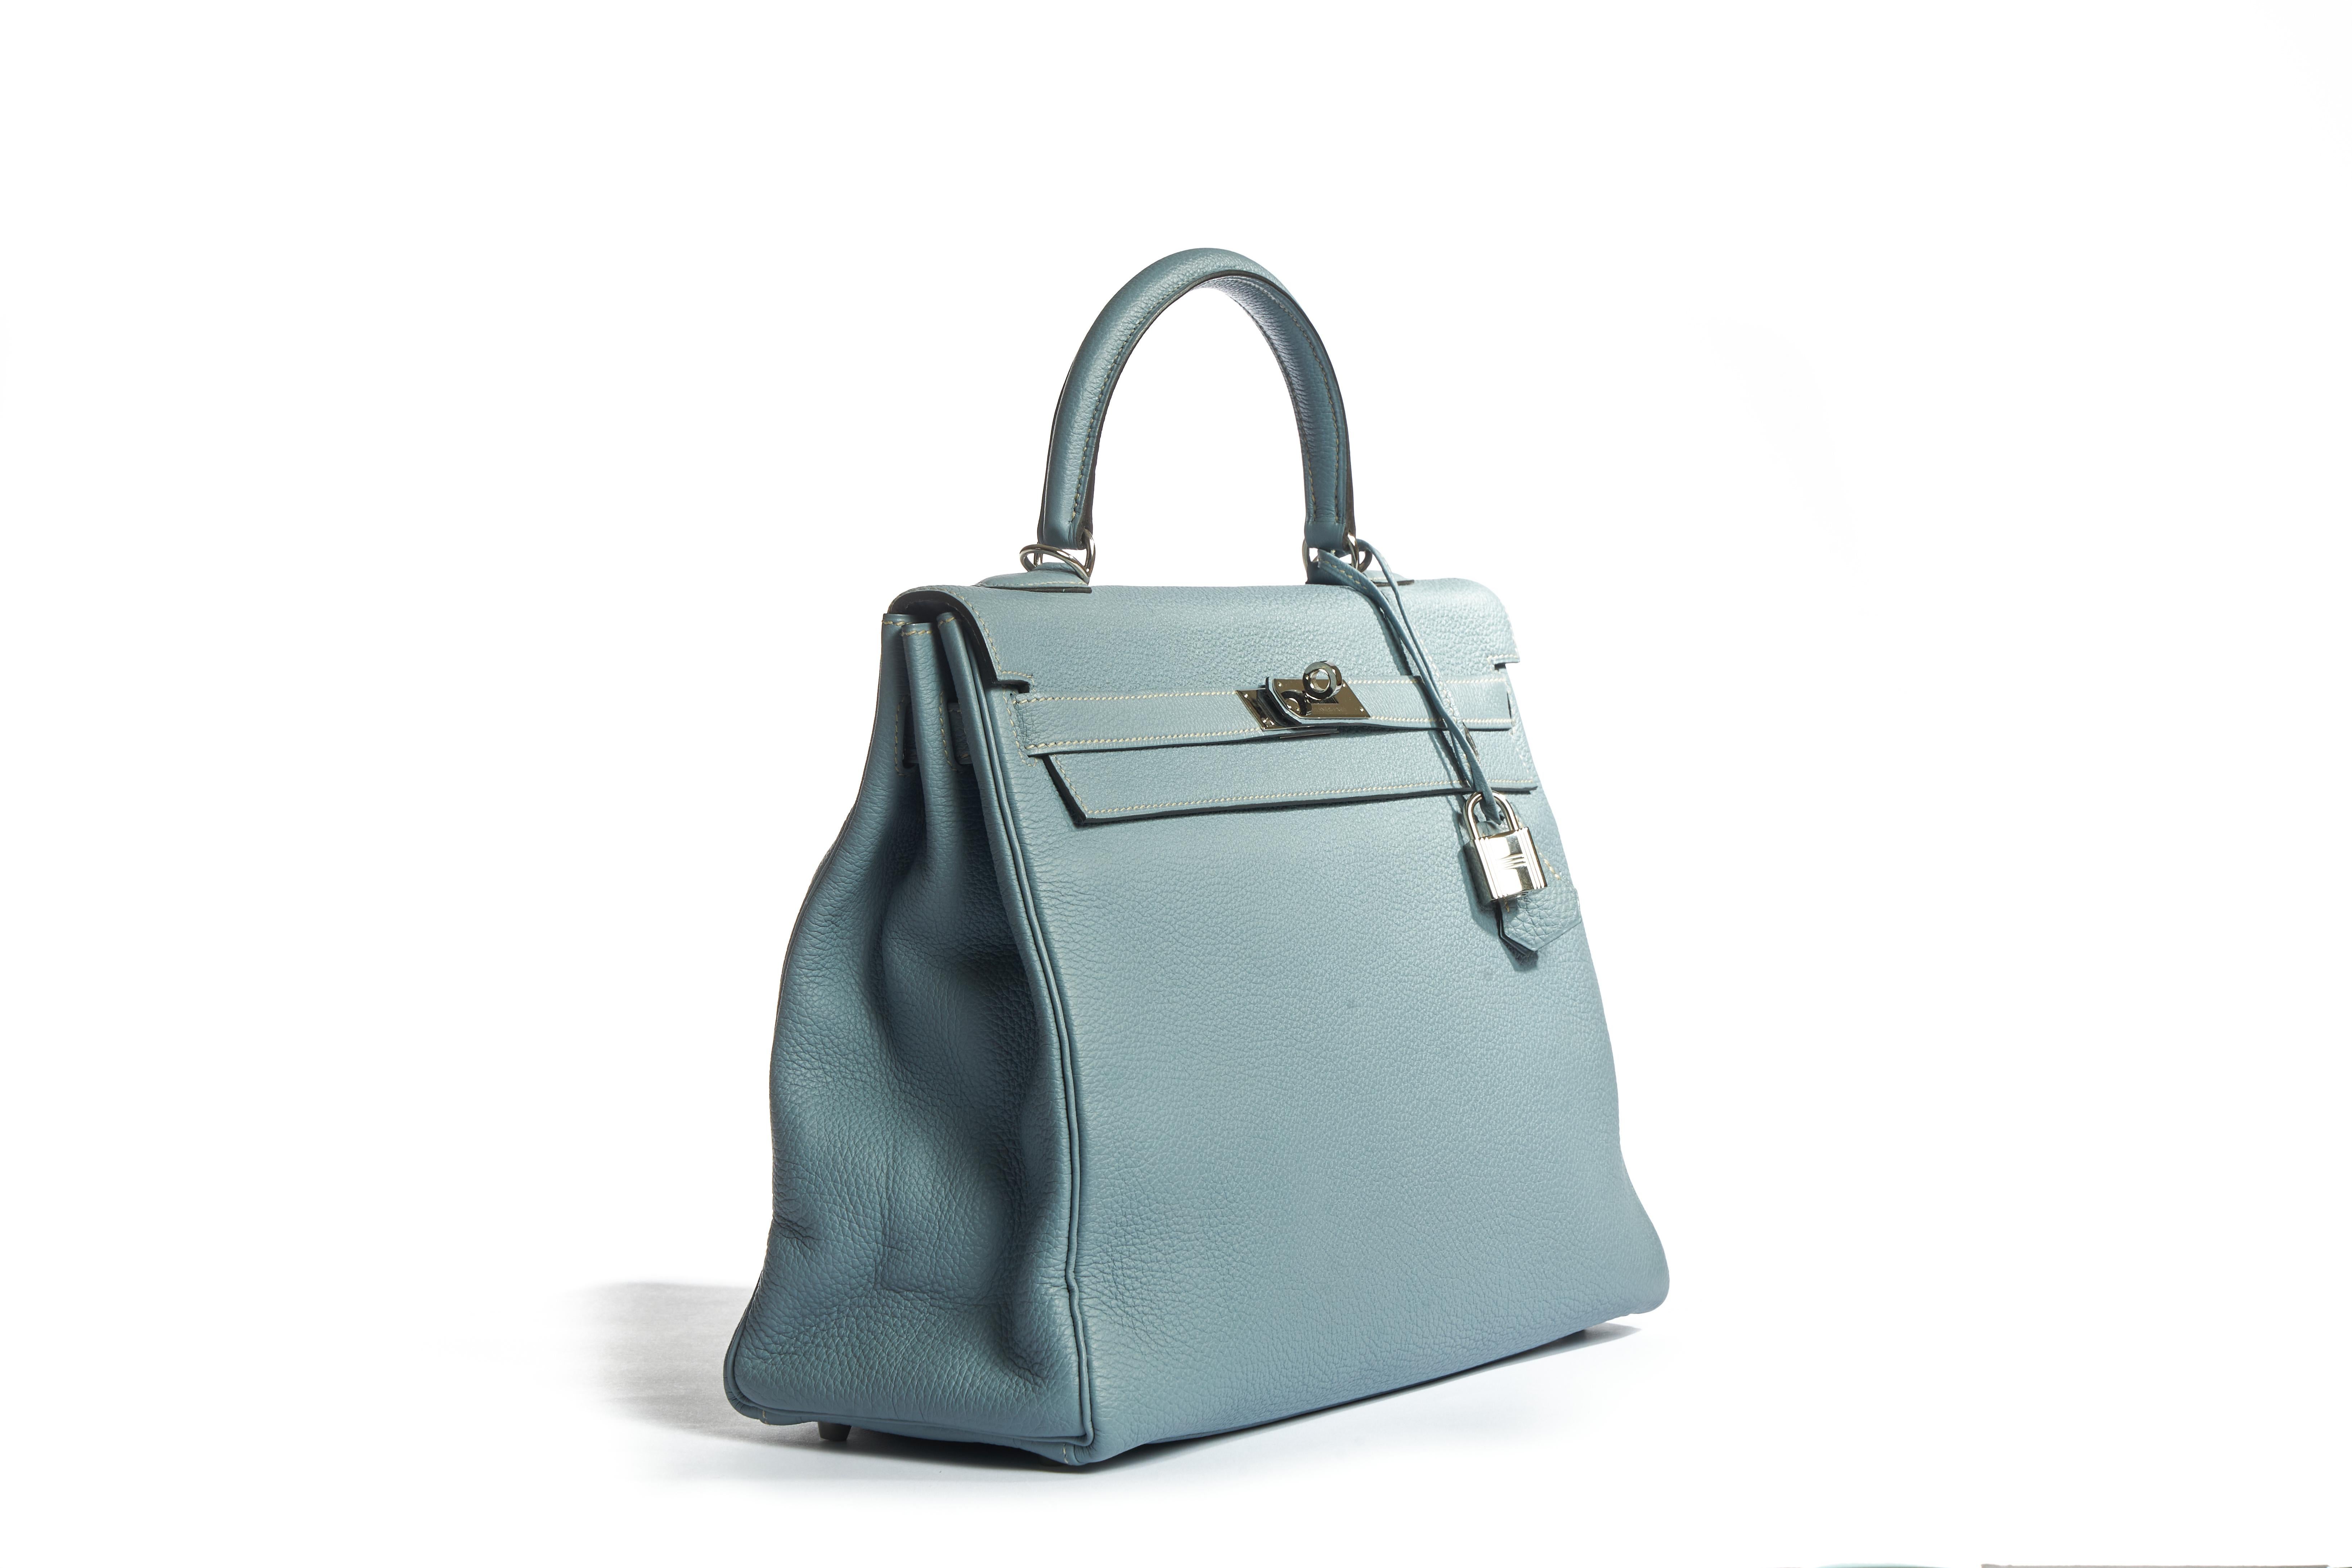 Hermes kelly 35cm blue ciel togo leather and palladium hardware in excellent condition. Handle drop 3.5